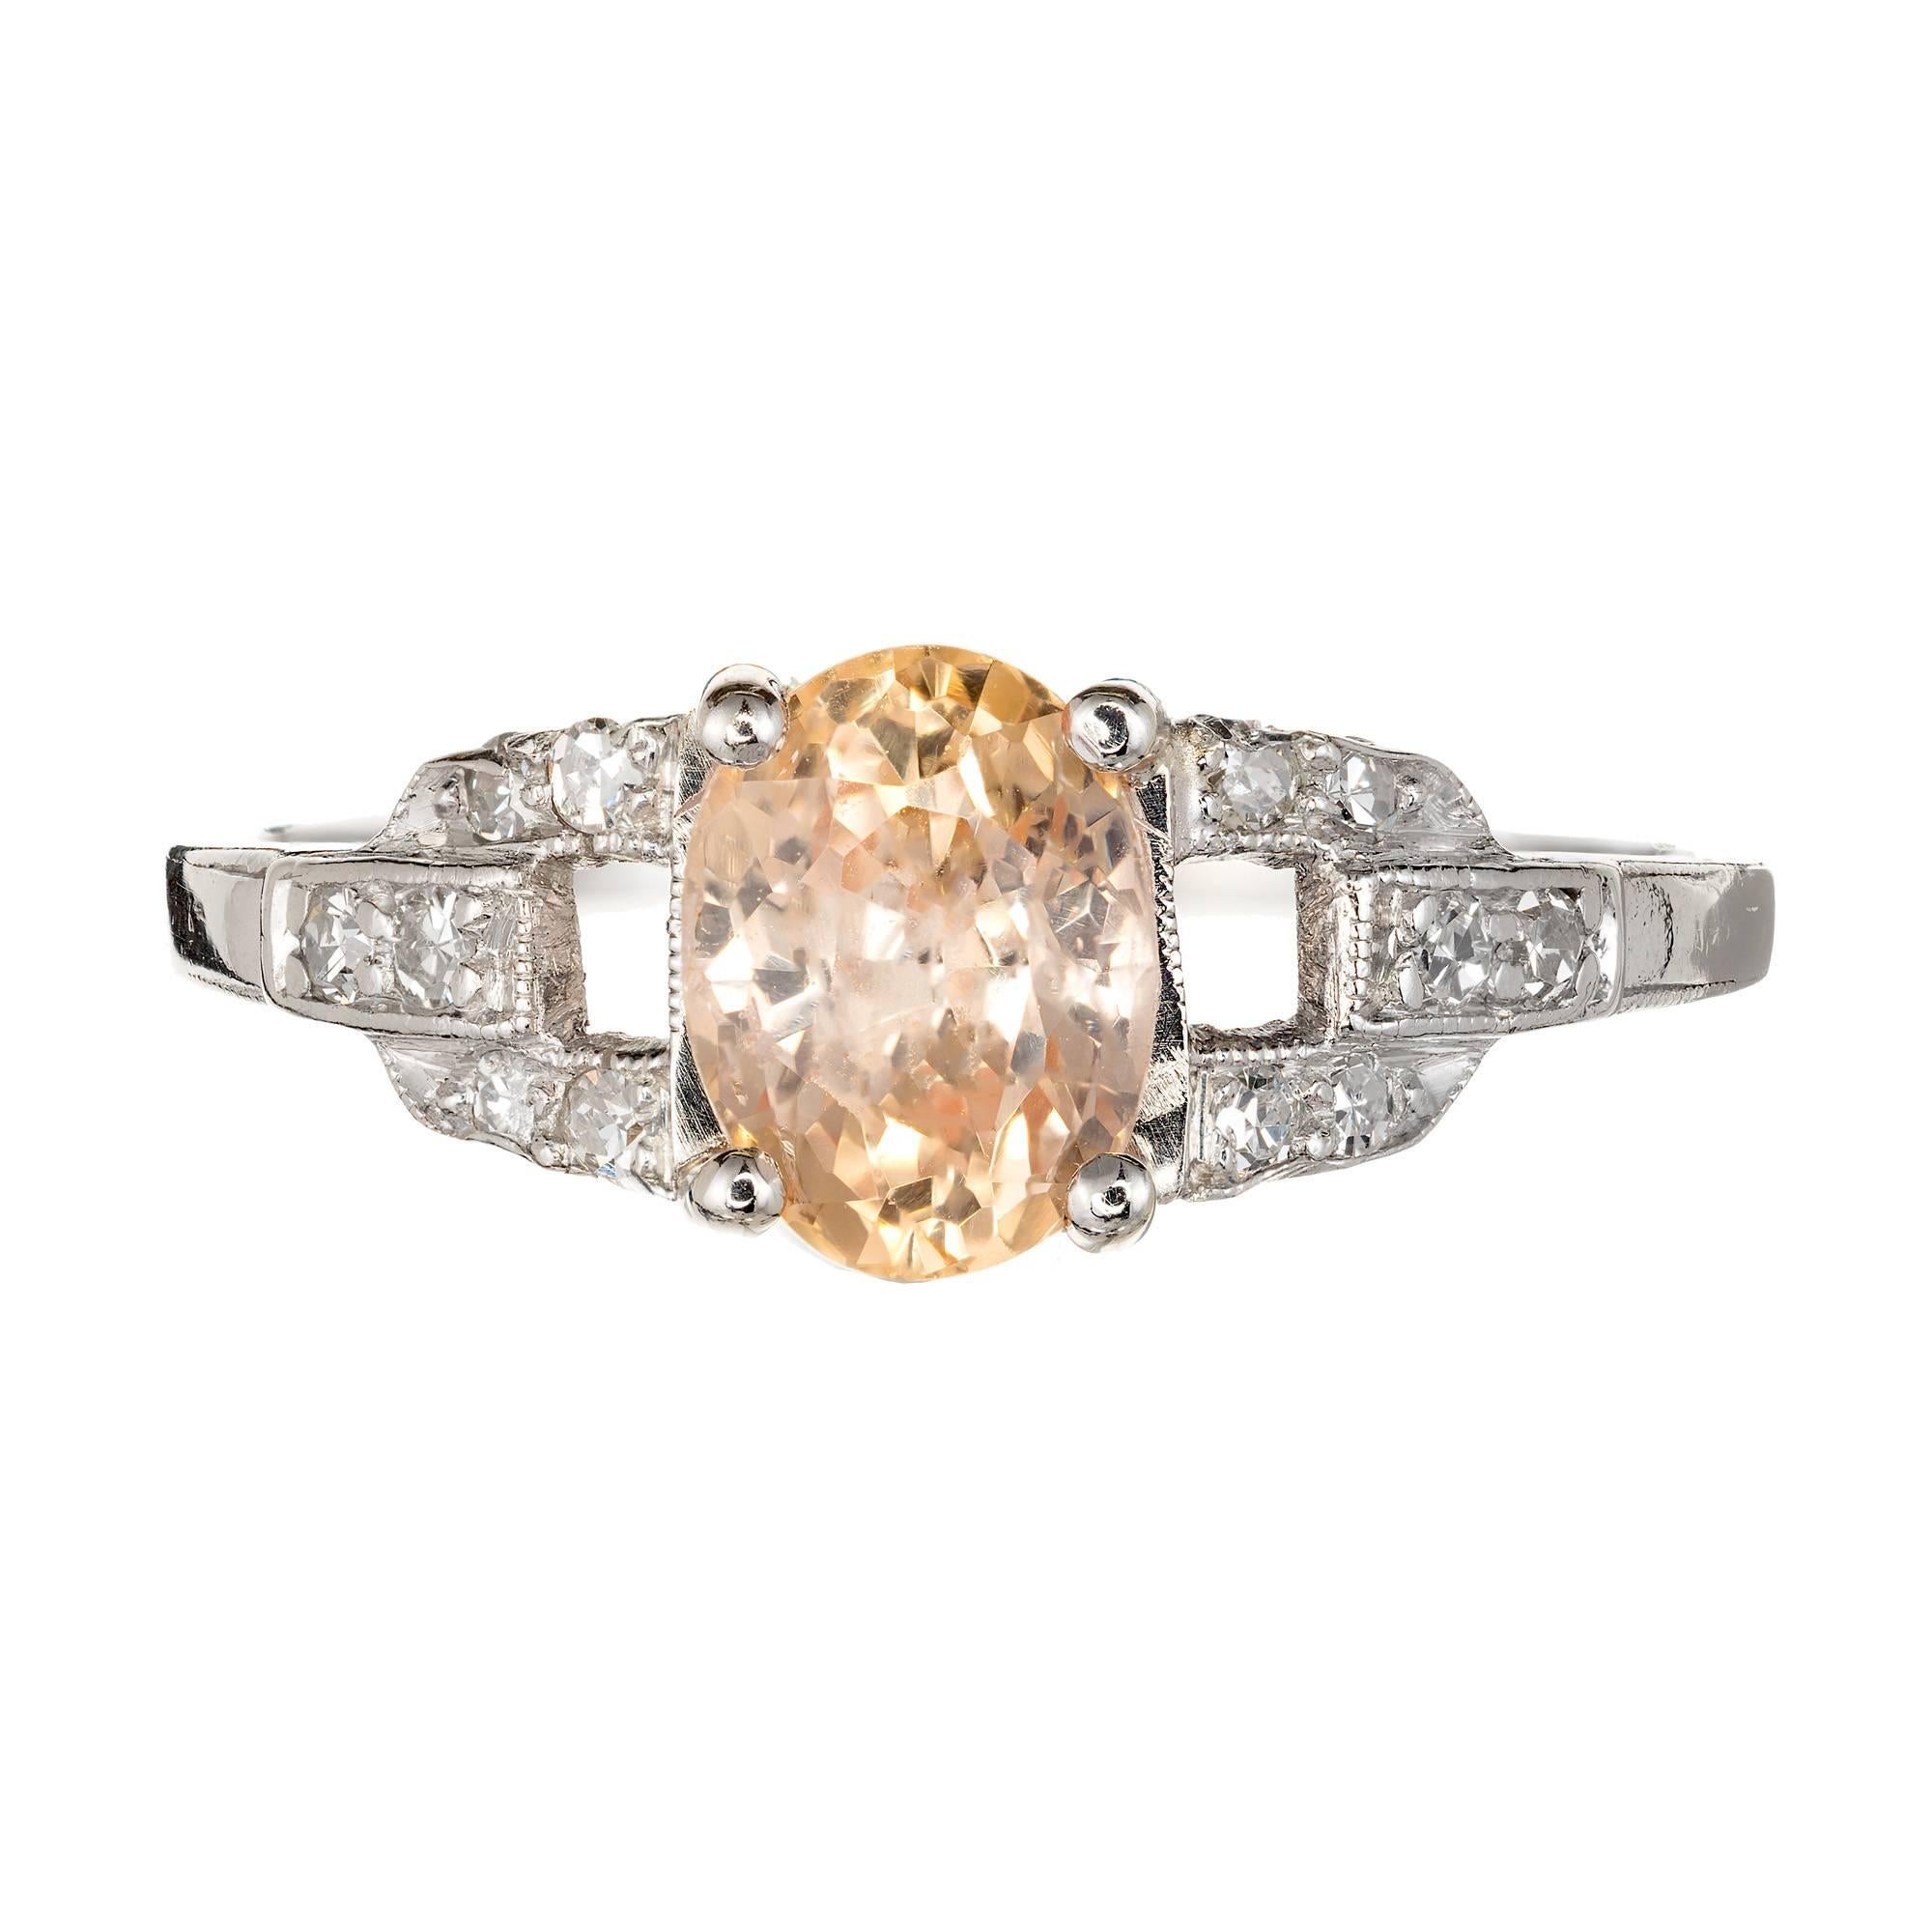 Art Deco 1930's Platinum setting with a yellow orange natural no heat no enhancement Sapphire and diamond engagement ring.  Original old European cut sapphire with raised crown and small table accented with single cut diamonds. 

1 GIA certified